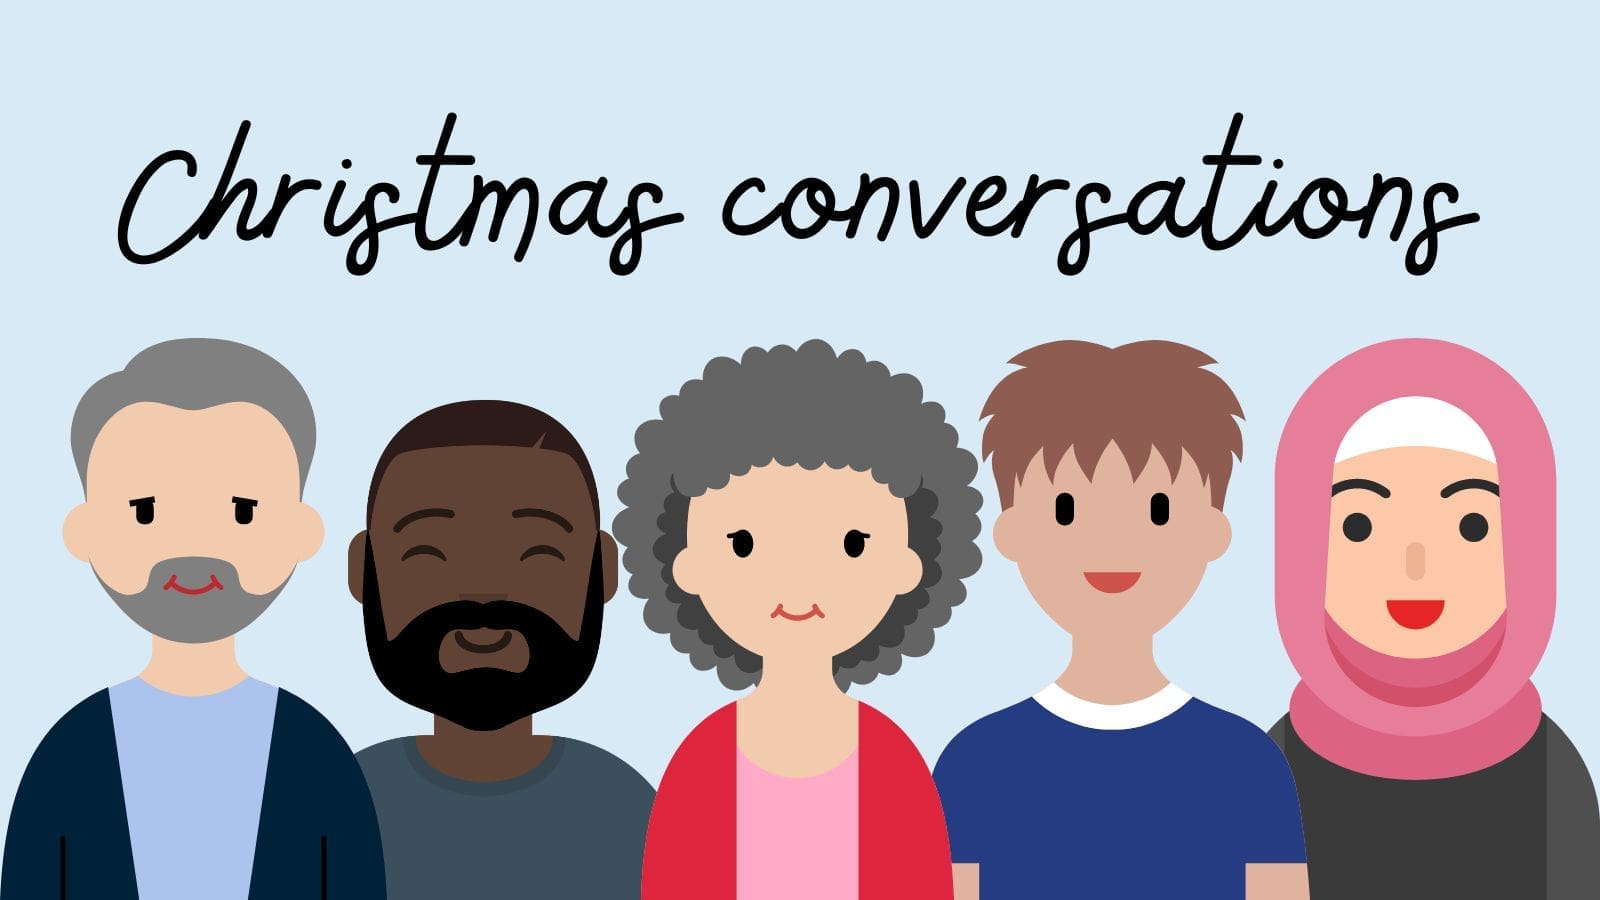 The word "Christmas conversations" in black handwriting. Below this are five people.